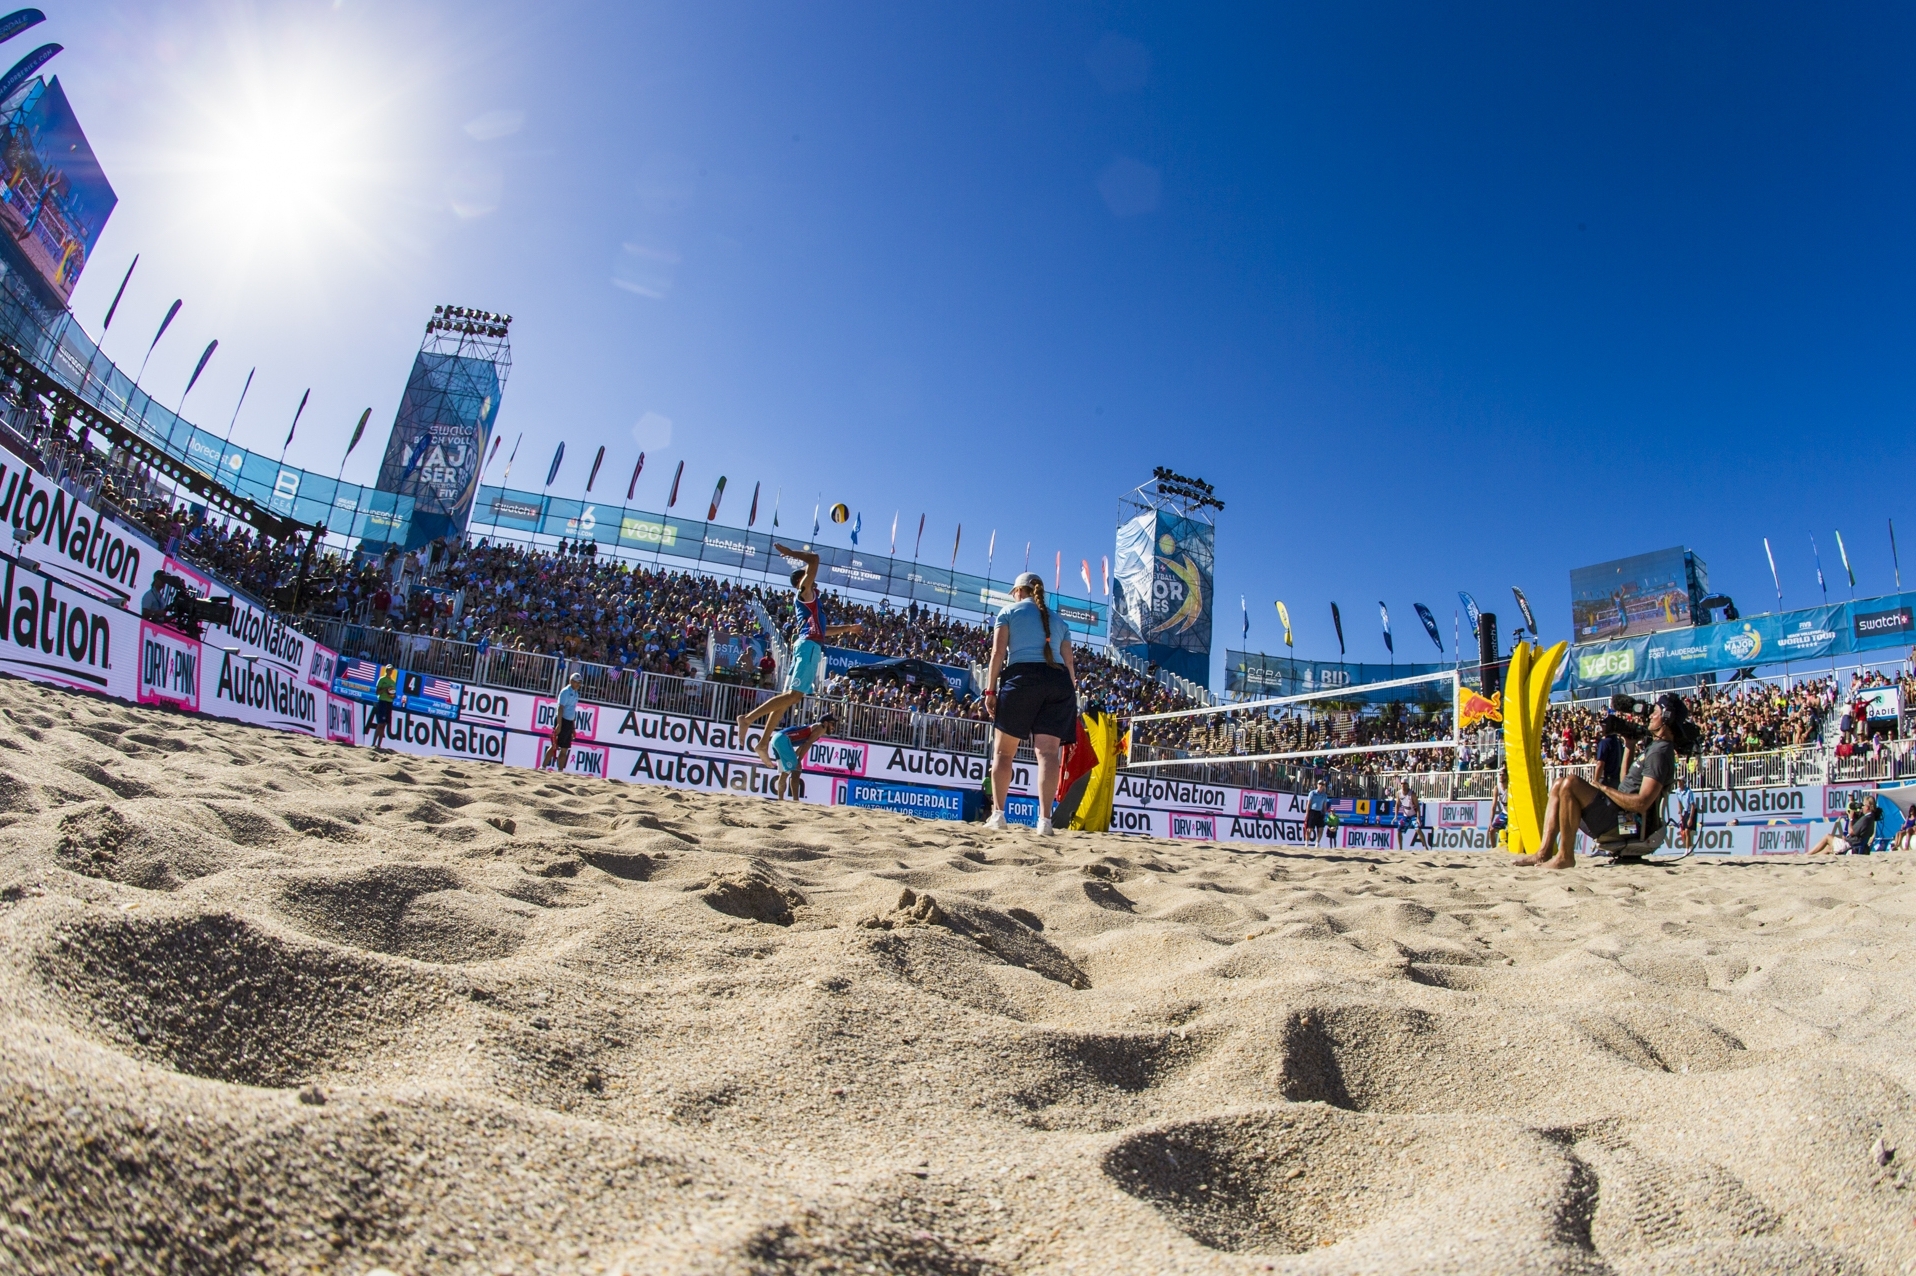 Packed crowds watched the Fort Lauderdale Major - and we loved every minute of it!